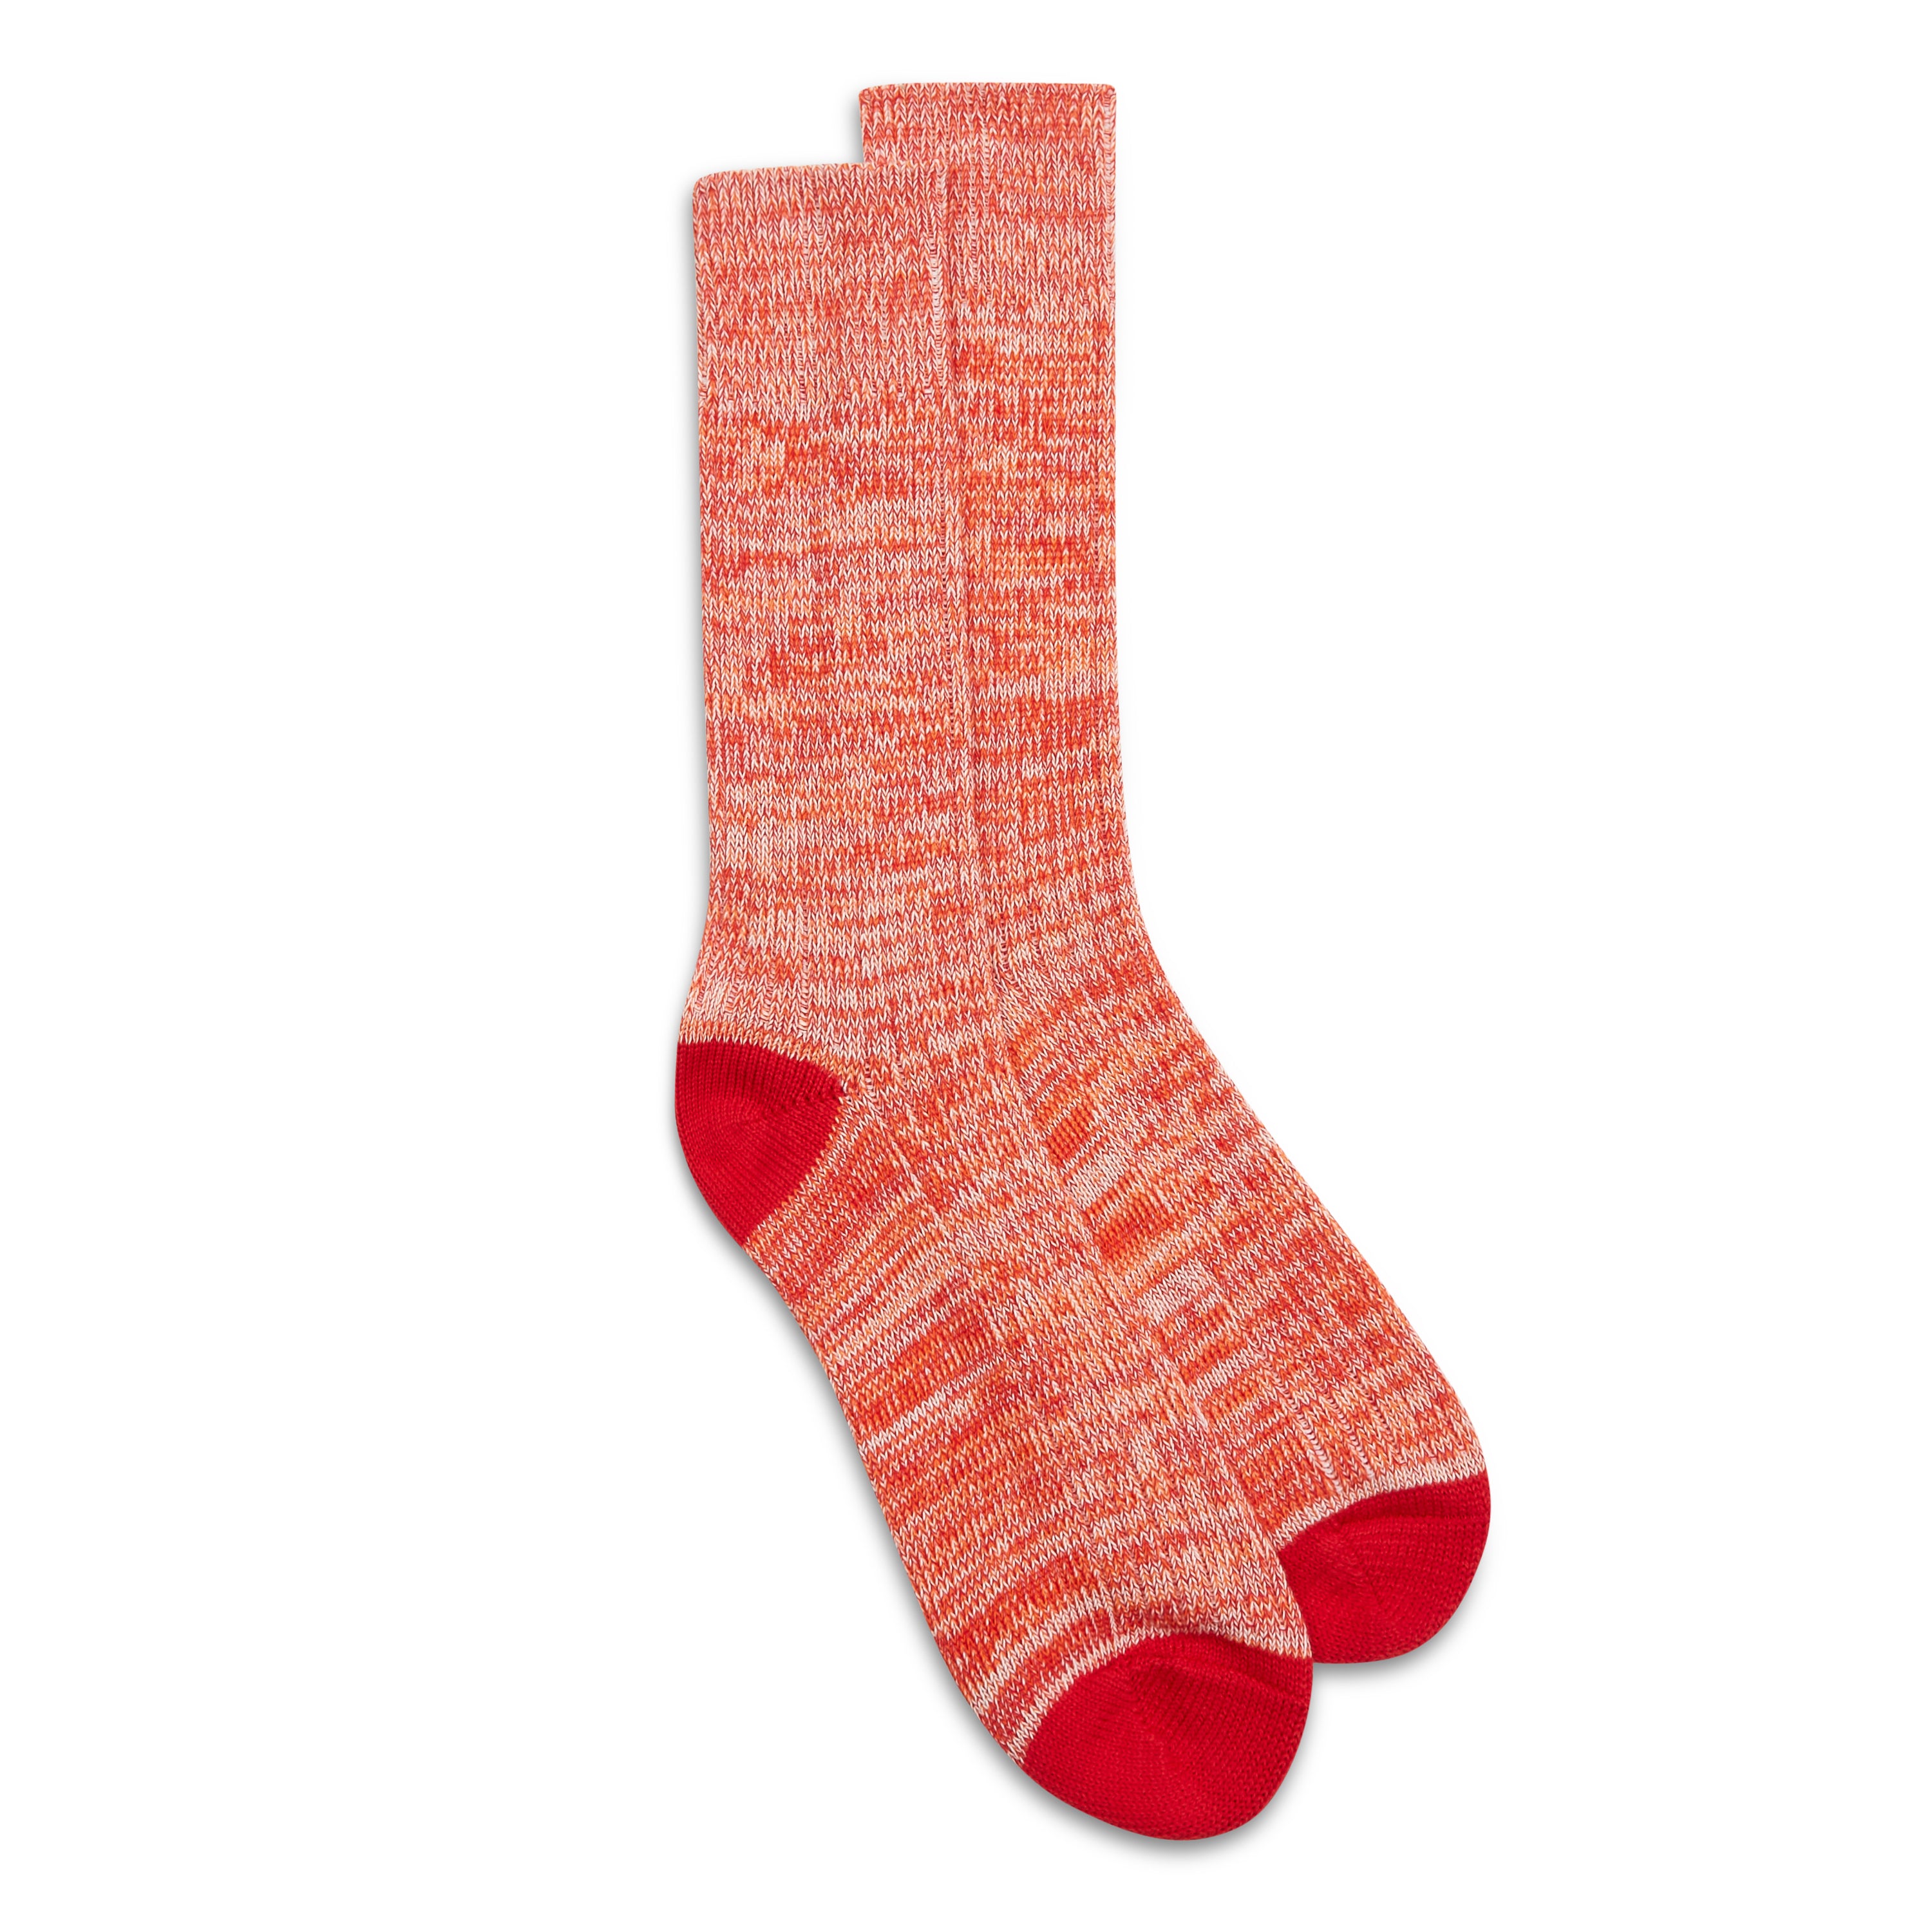 burrows-and-hare-knitted-socks-red